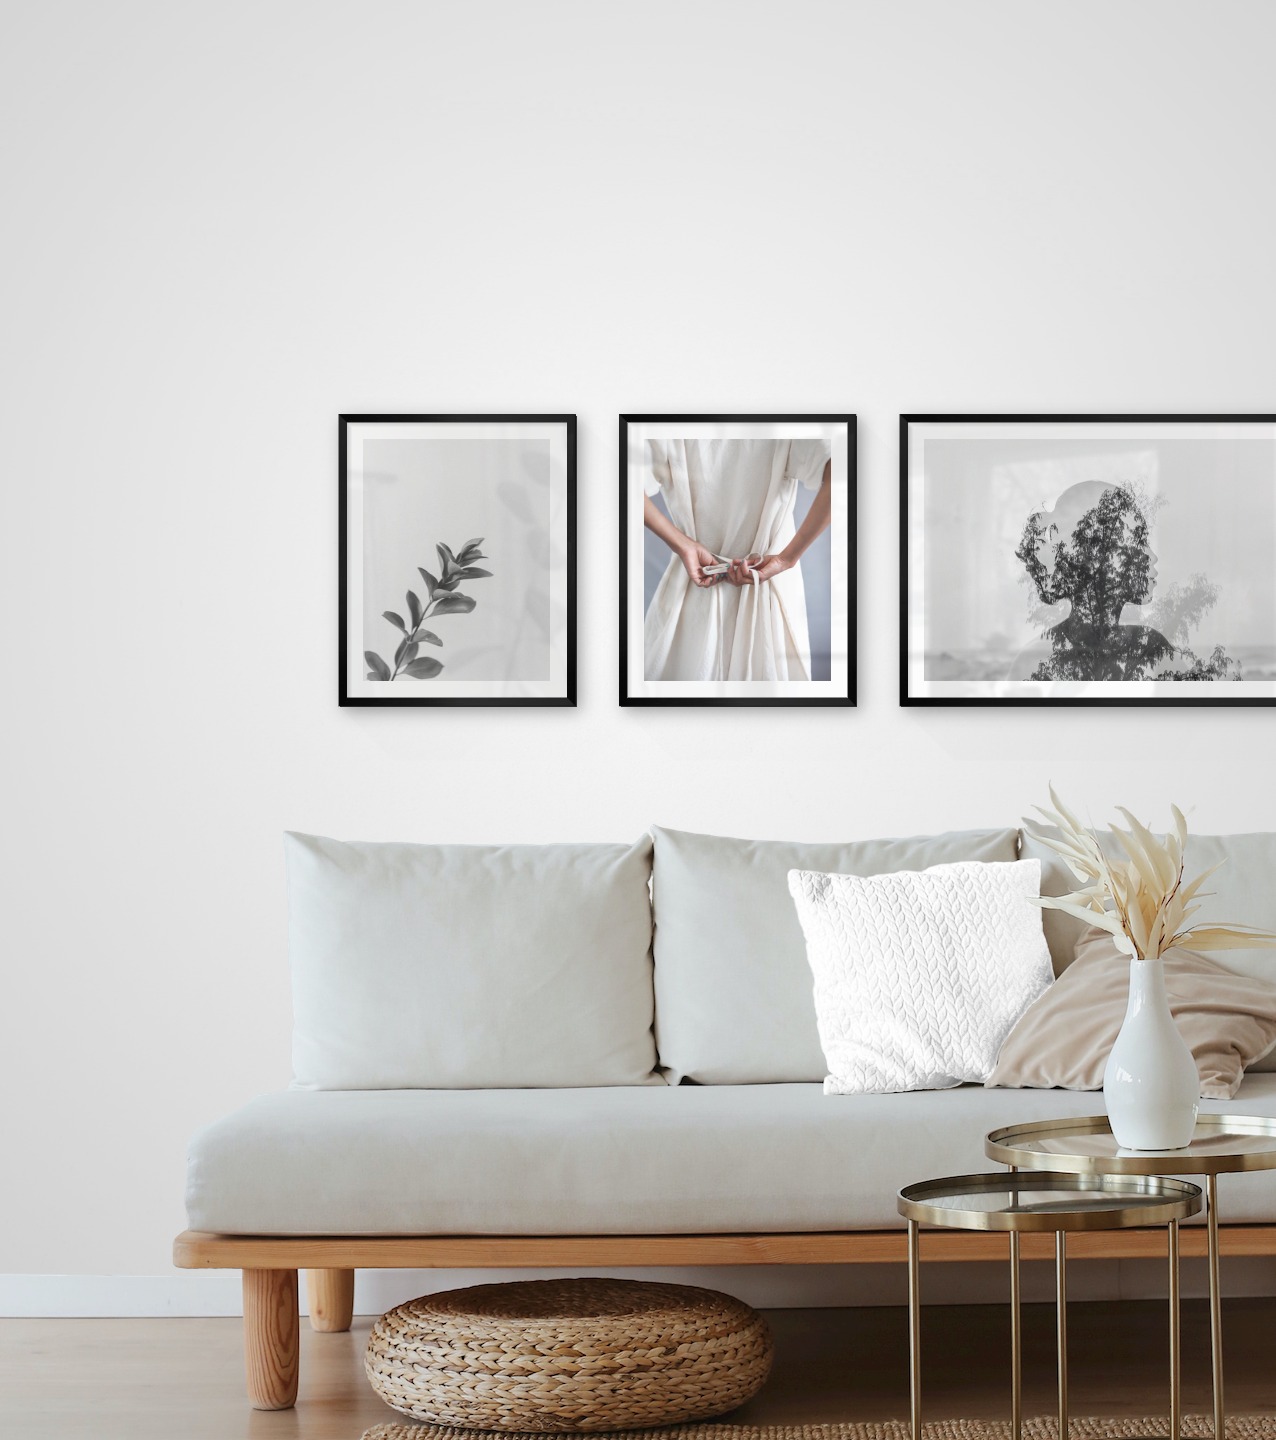 Gallery wall with picture frames in black in sizes 40x50 and 50x70 with prints "Twig", "Dress with waistband" and "Trees and silhouette"